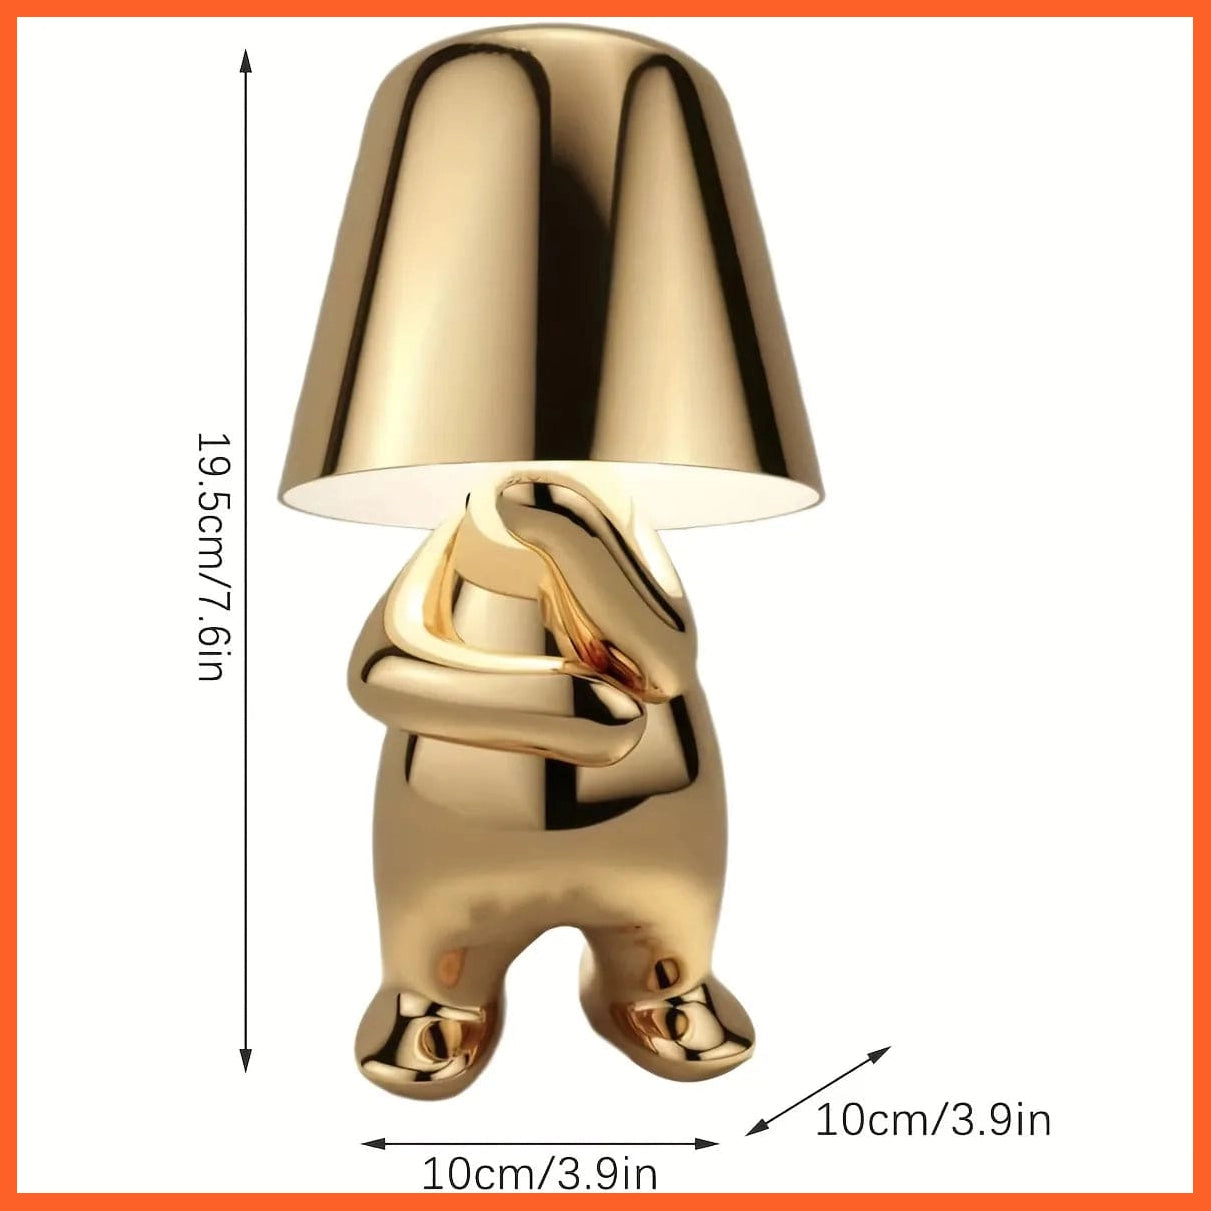 whatagift.com.au B Golden Color Thinker Statue LED Table Lamp With USB Port| Nightstand Lamp For Home, Living Room